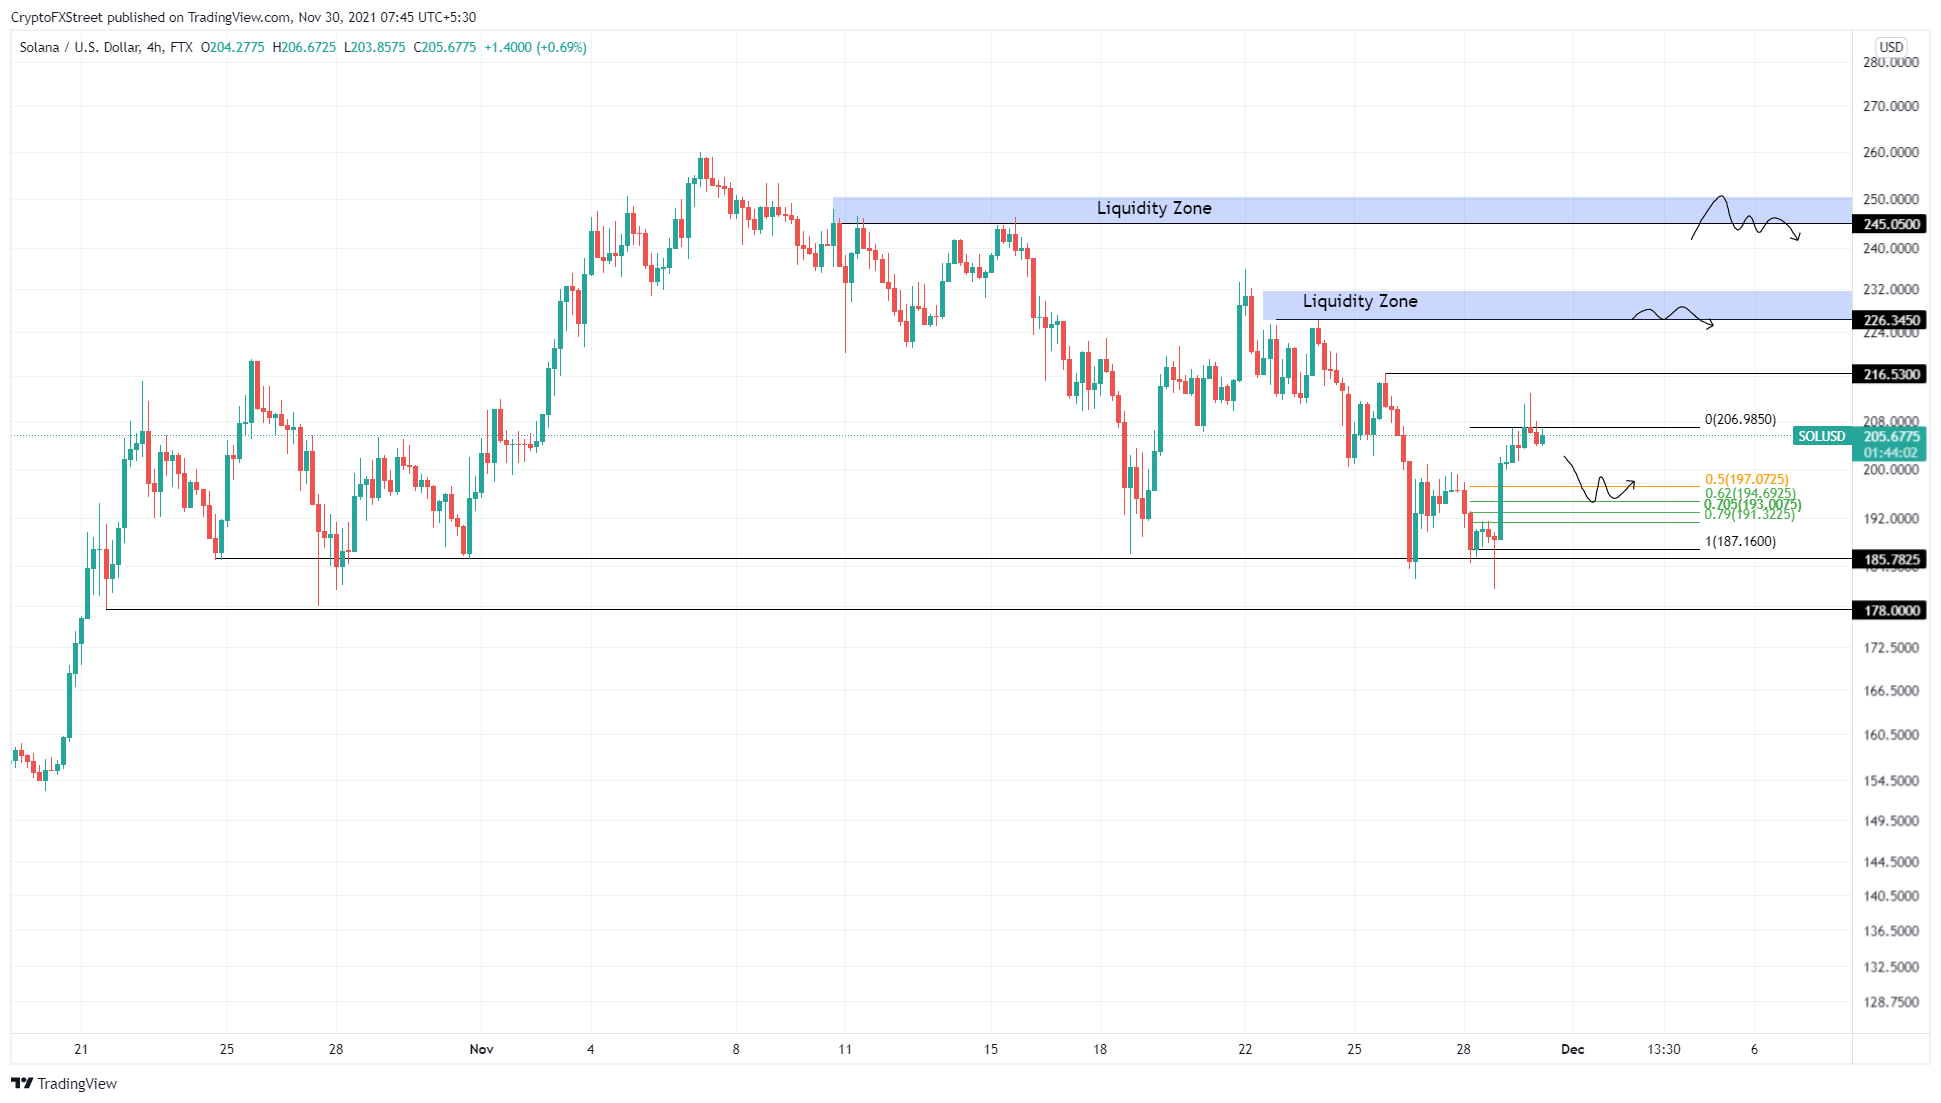 SOL/USD 4-hour chart